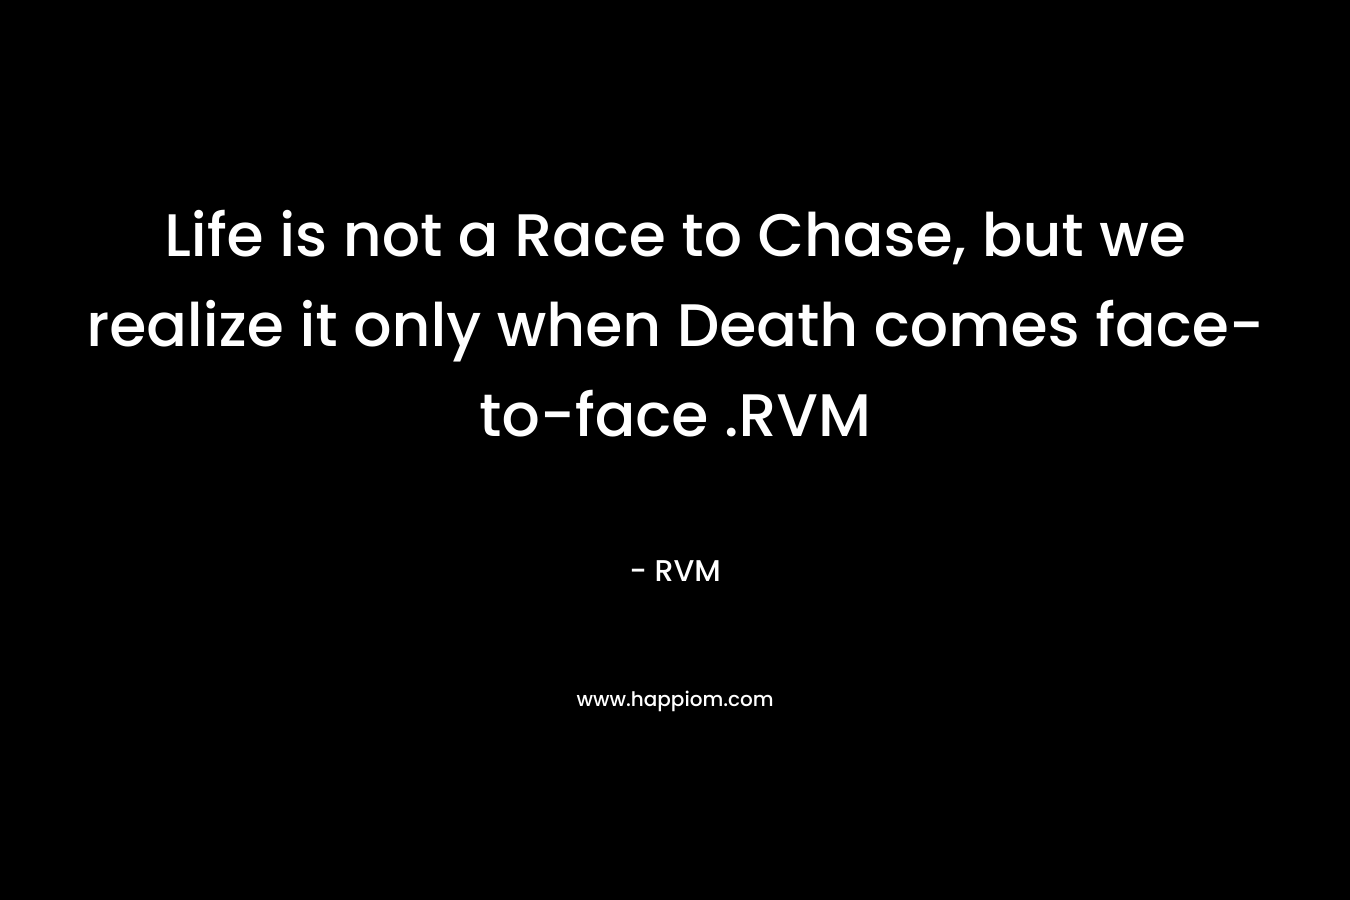 Life is not a Race to Chase, but we realize it only when Death comes face-to-face .RVM